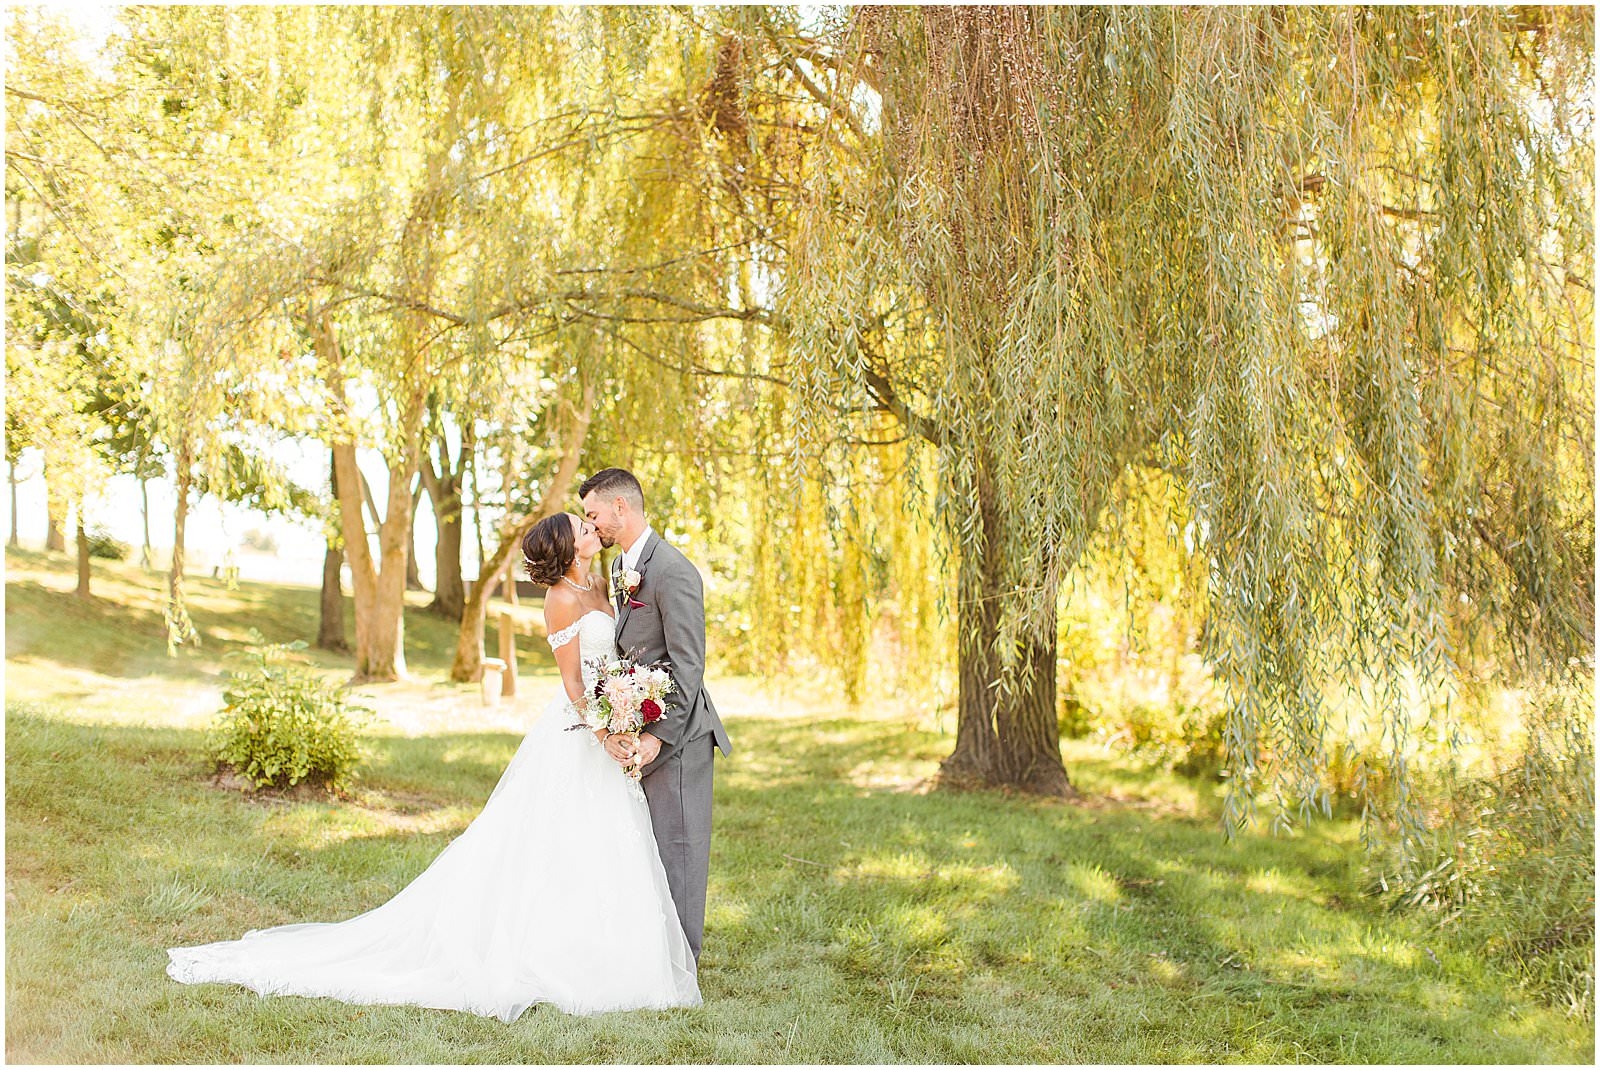 A Stunning Fall Wedding in Indianapolis, IN |. Sally and Andrew | Bret and Brandie Photography 0057.jpg